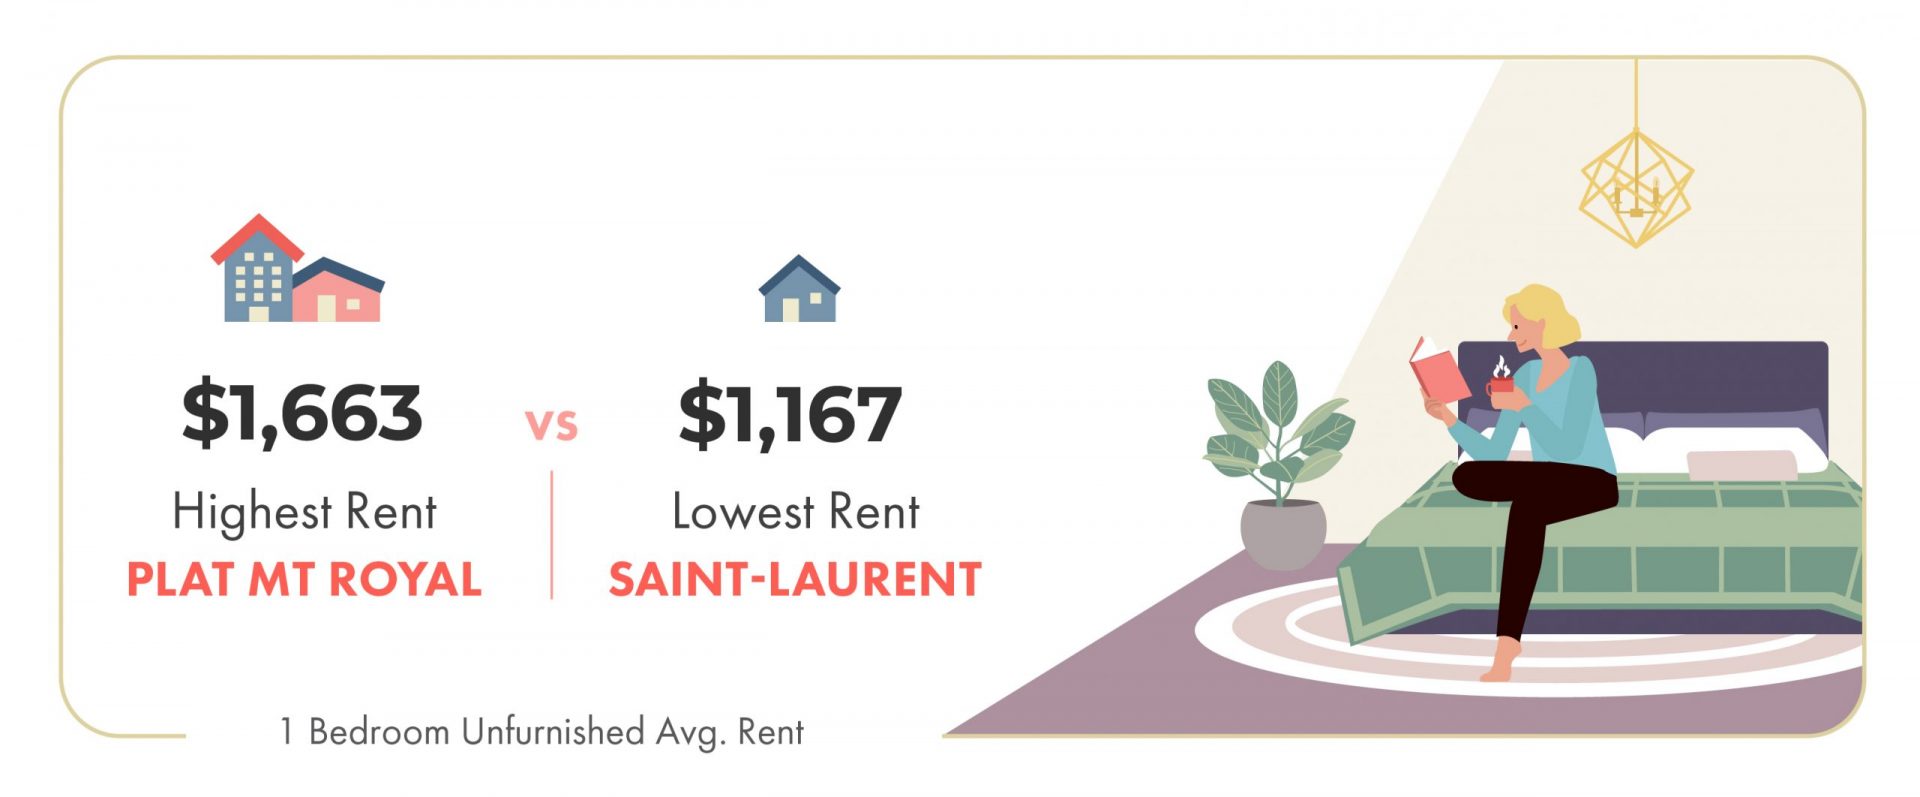 February 2020 Montreal Rent prices